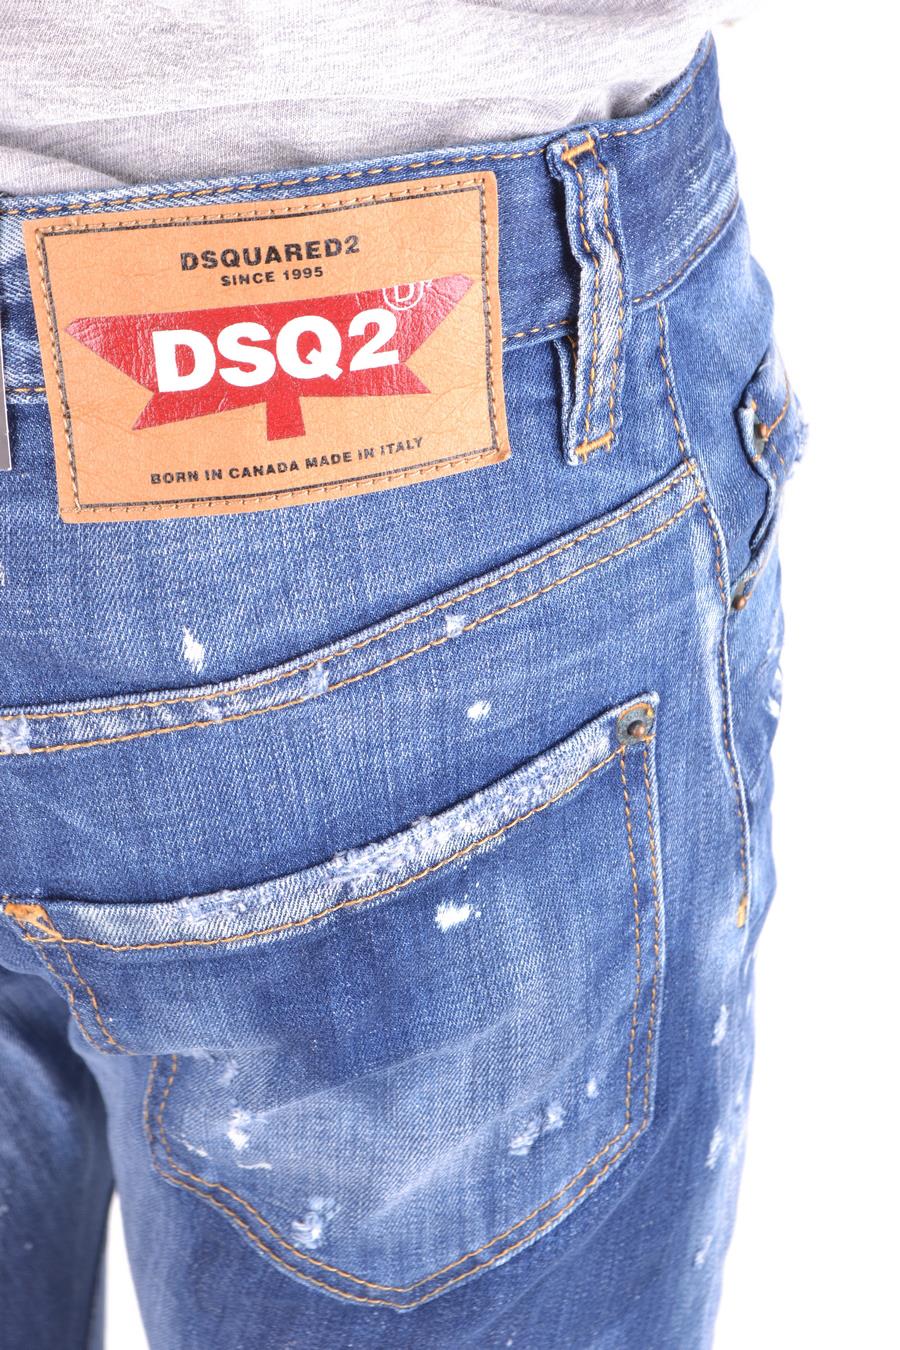 dsquared jeans canada